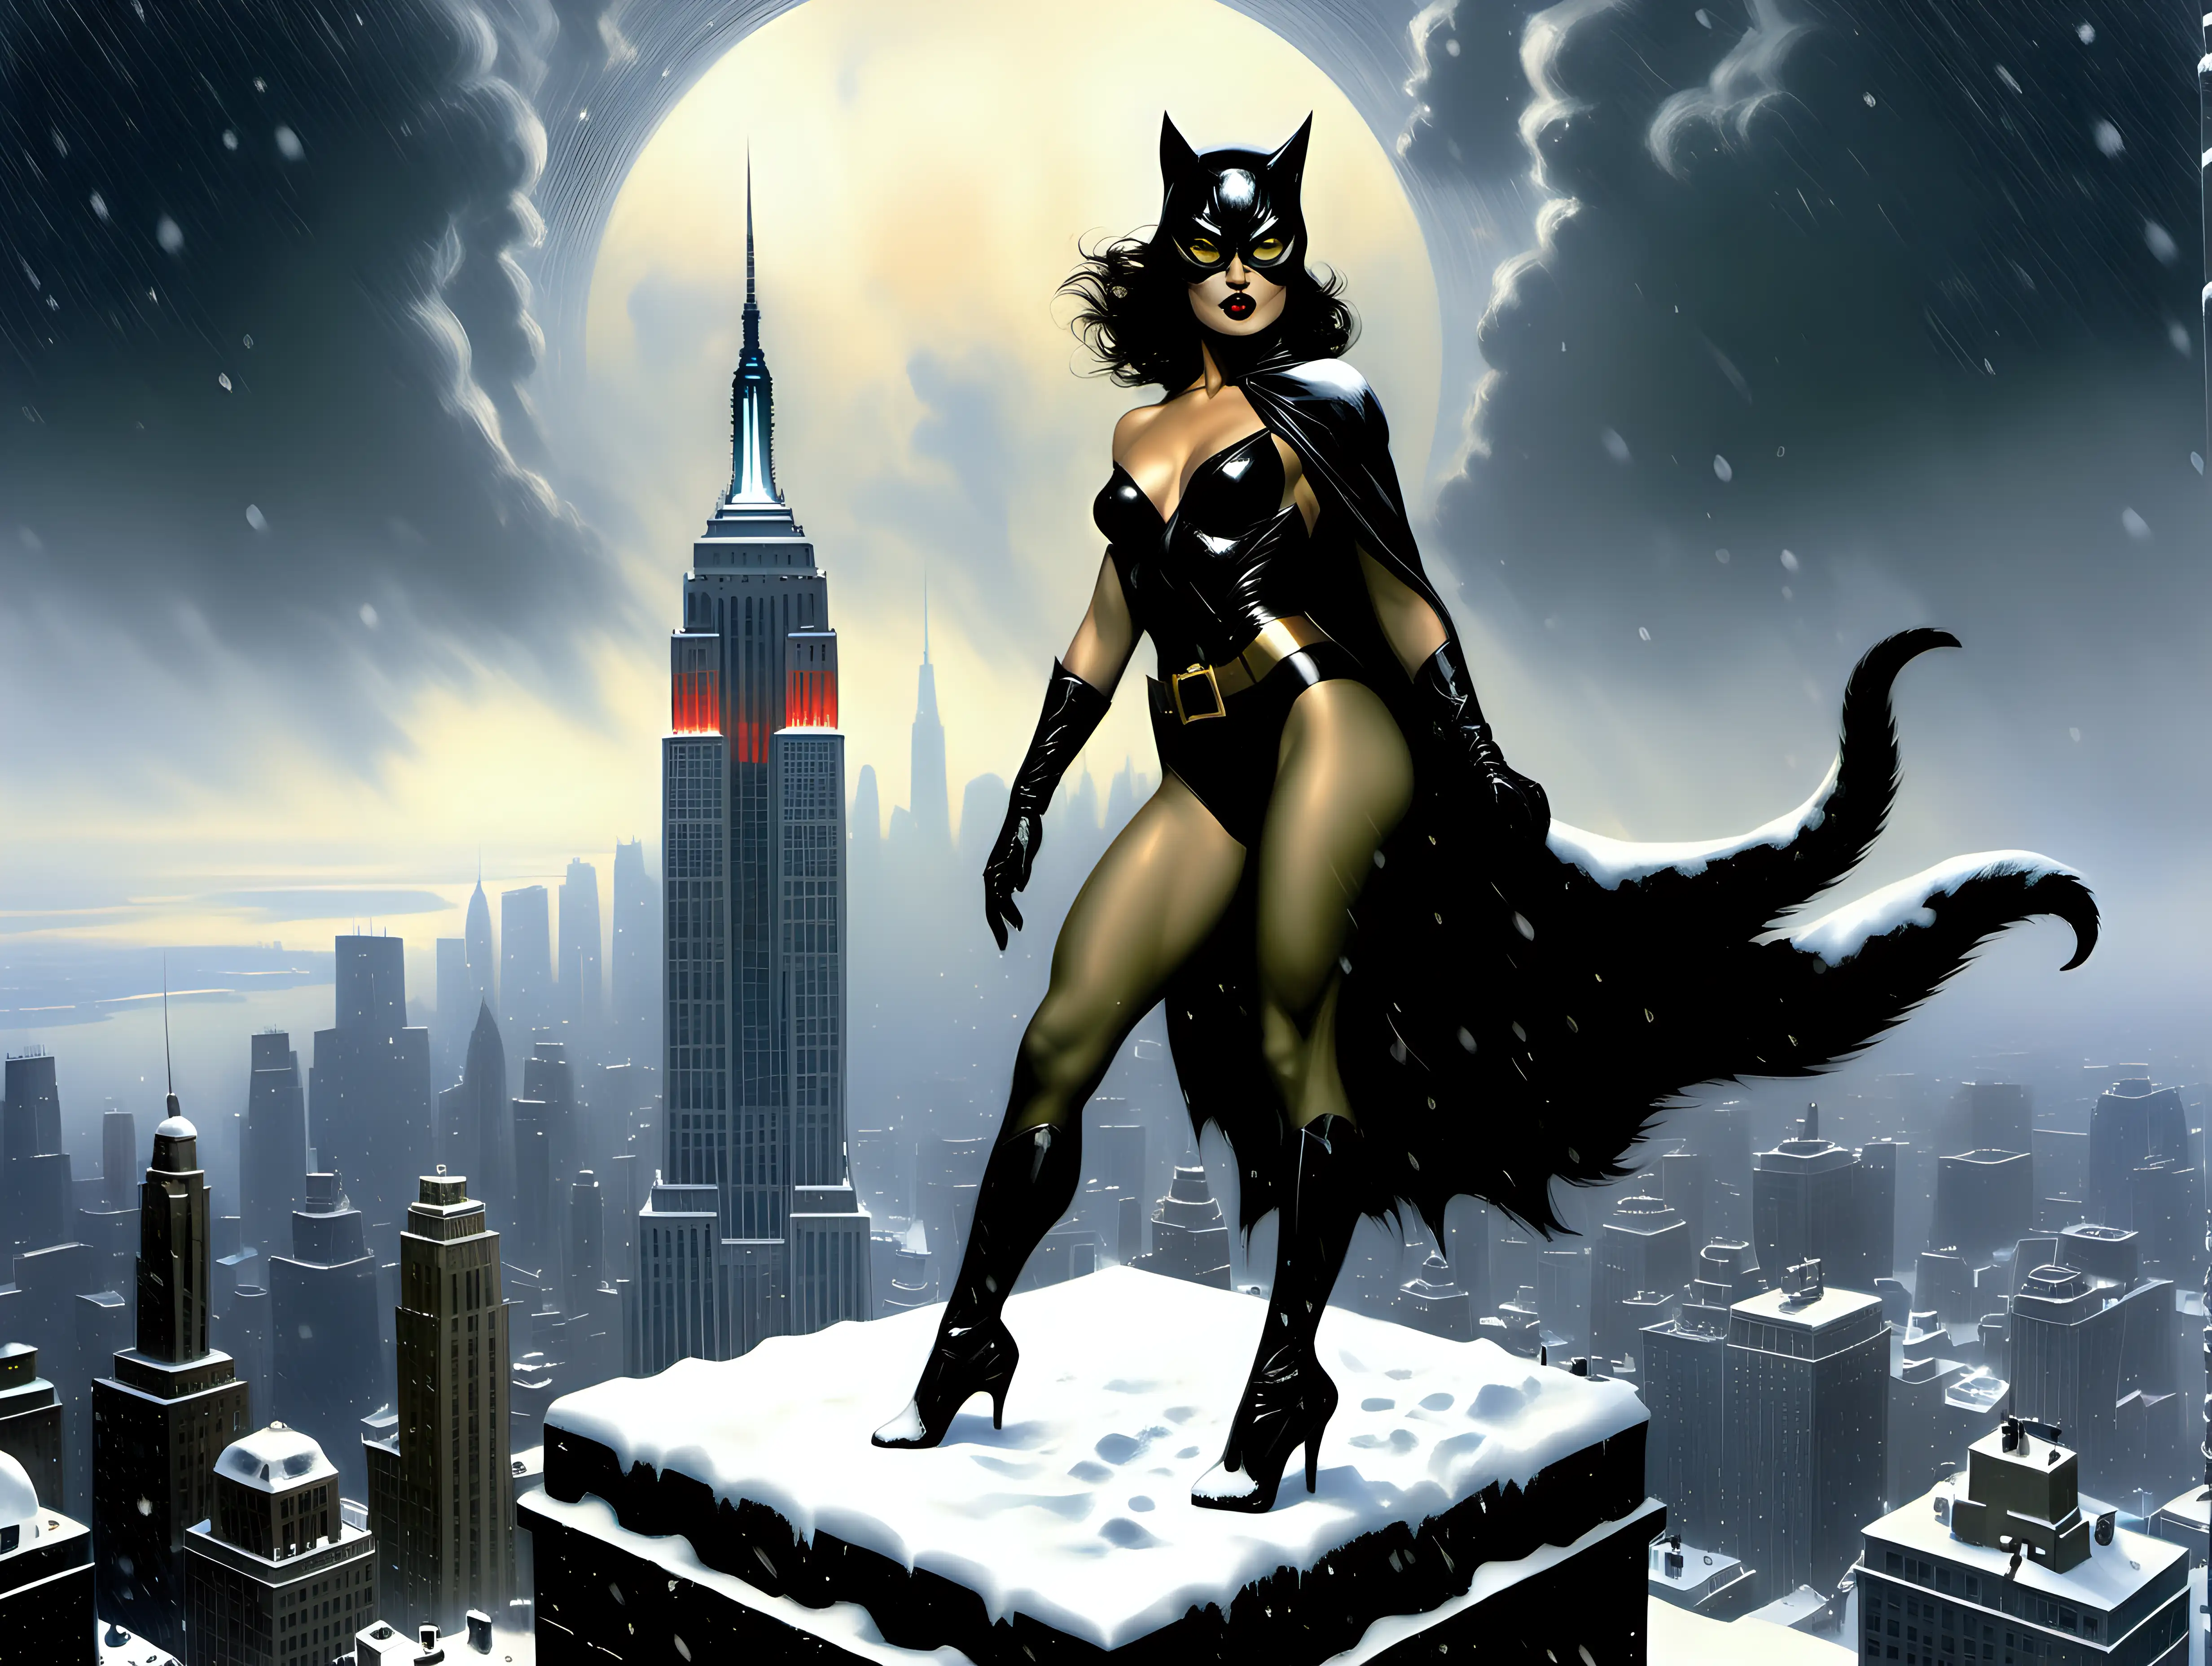 Cat woman on the top of Empire State building in a snow storm Frank Frazetta style